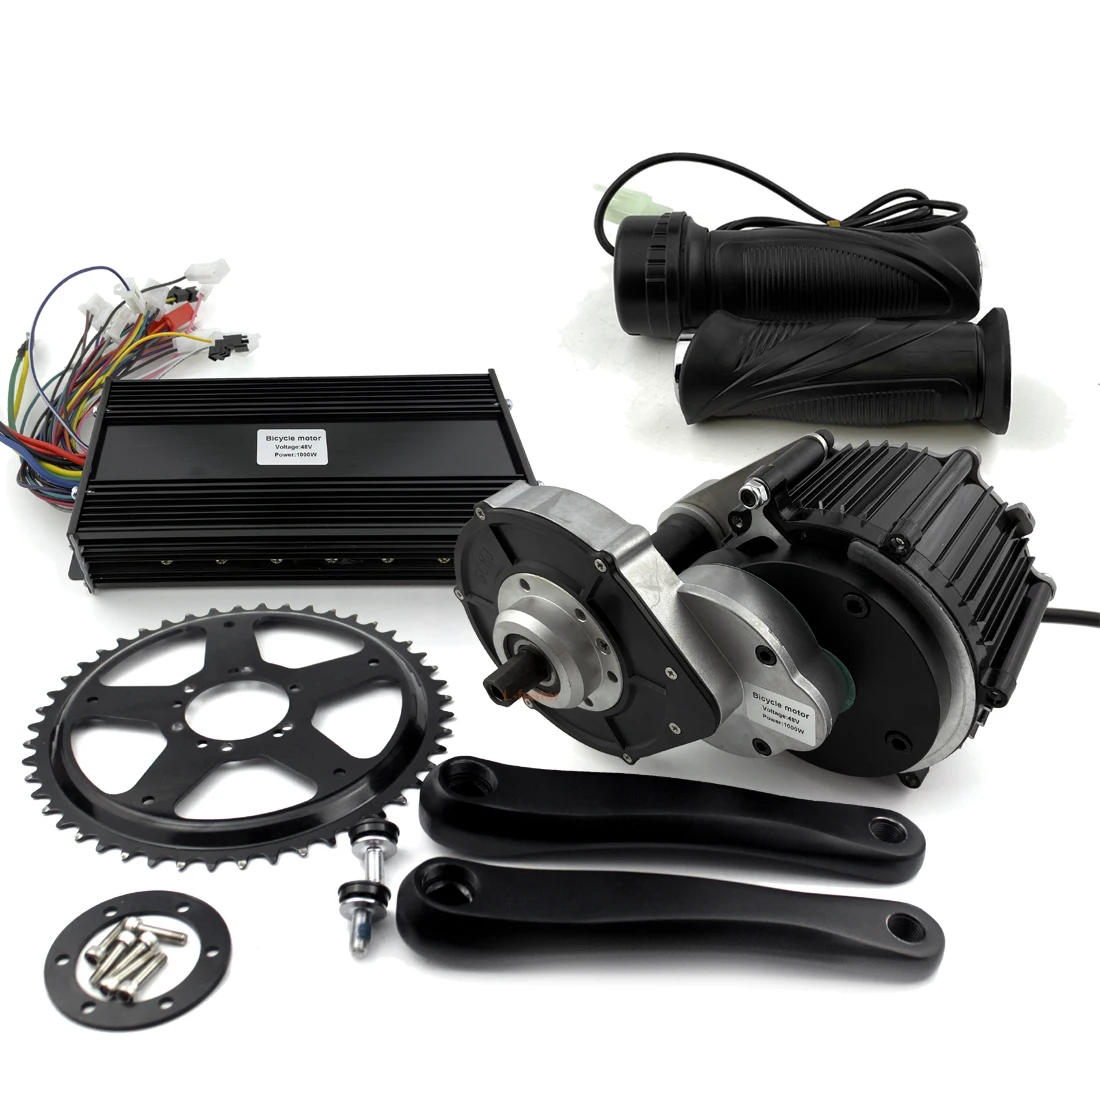 

L-faster 48V 1000W Bicycle Electric Conversion Kit Middle Drive Brushless Engine Kit For Bicycle Crankset Position